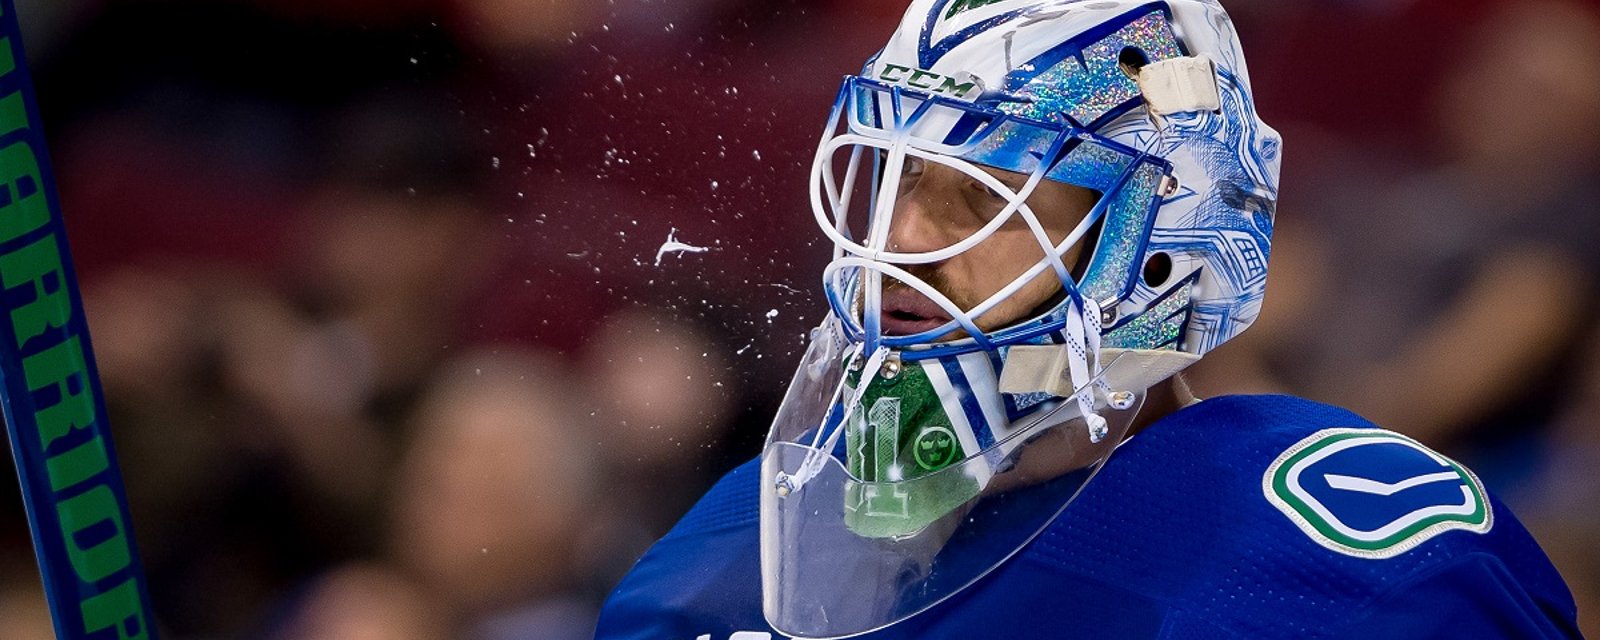 Report: Canucks lose yet another player to injury to start the regular season.